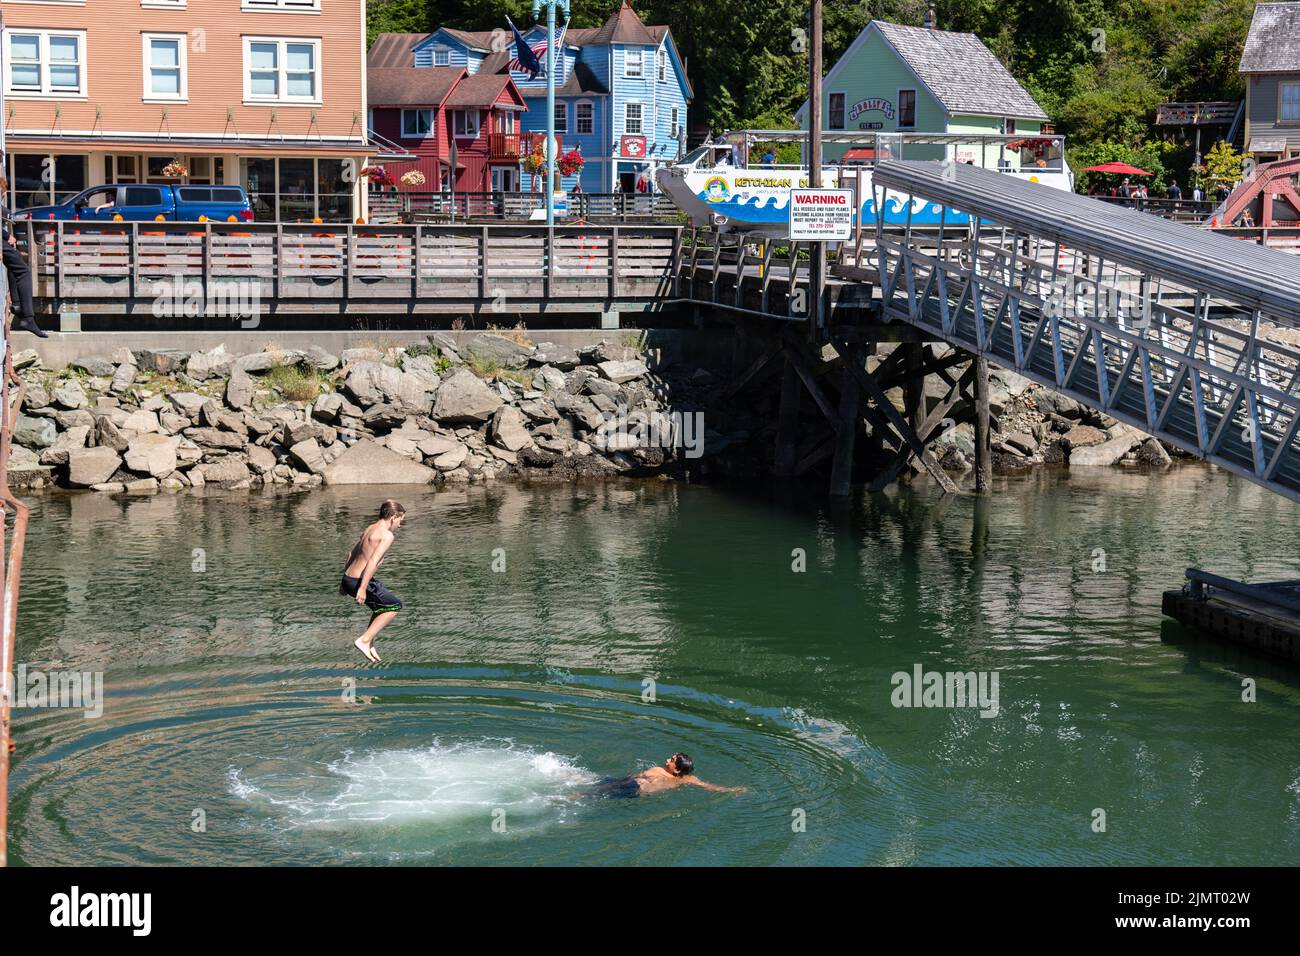 Young boys jump off the boardwalk into the water below at the historic Creek Street district built over Ketchikan Creek in Ketchikan, Alaska. Stock Photo